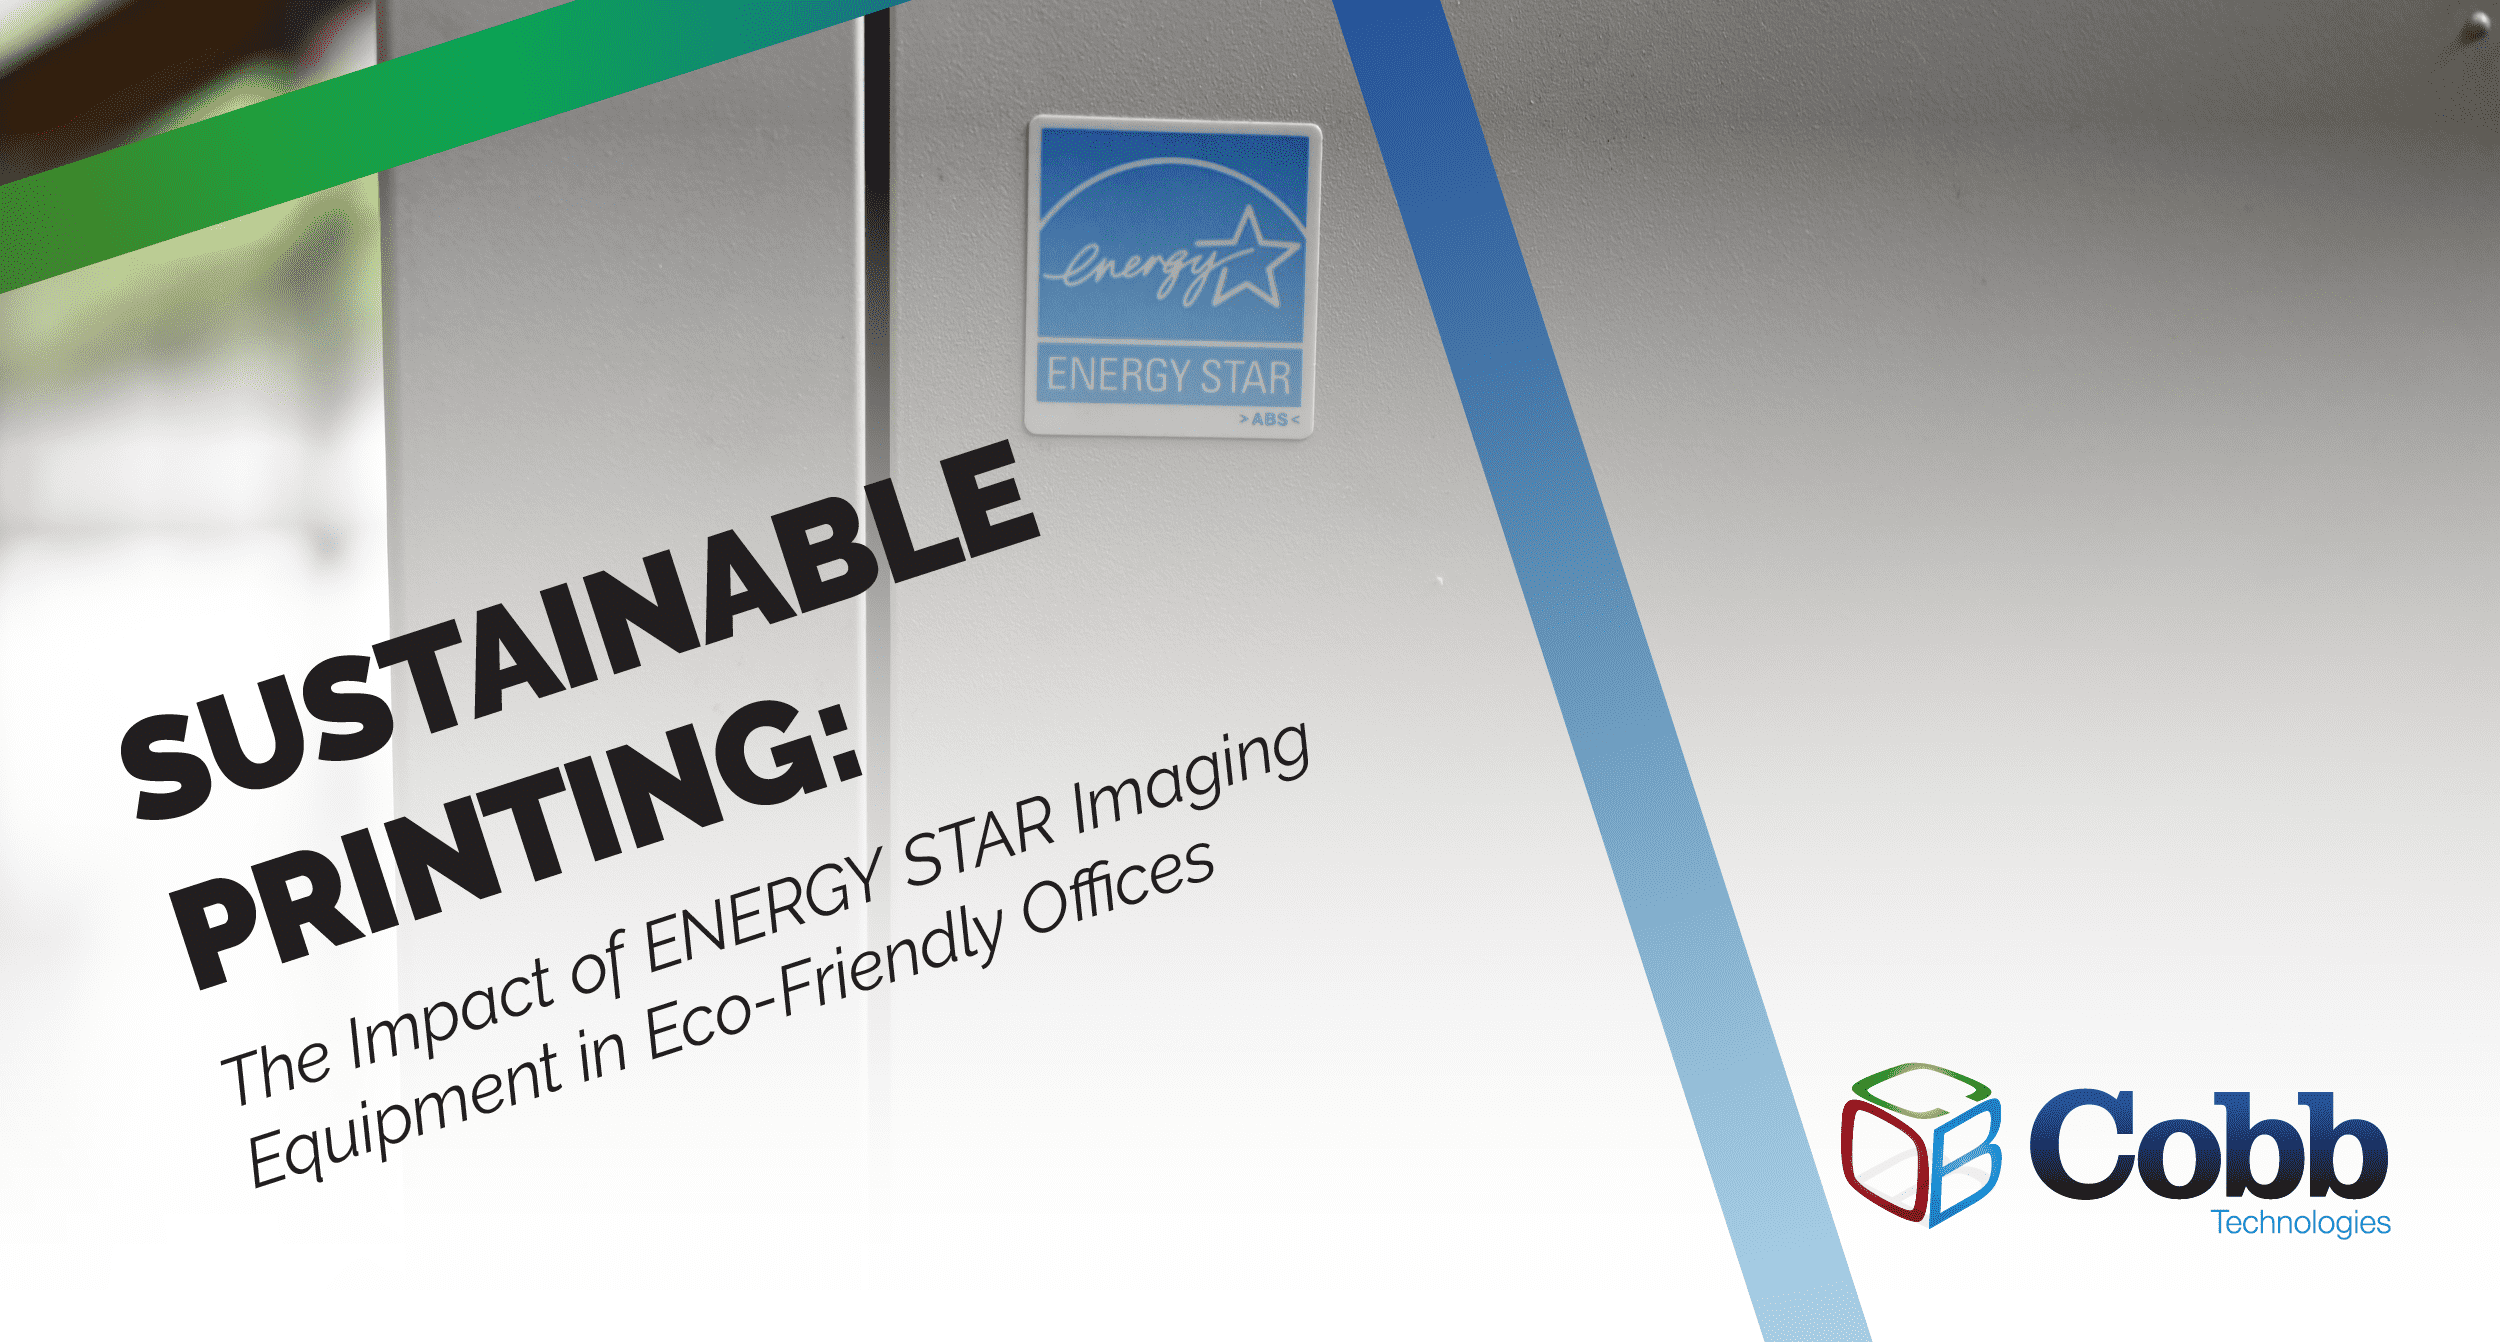 Sustainable Printing: The Impact of ENERGY STAR Imaging Equipment